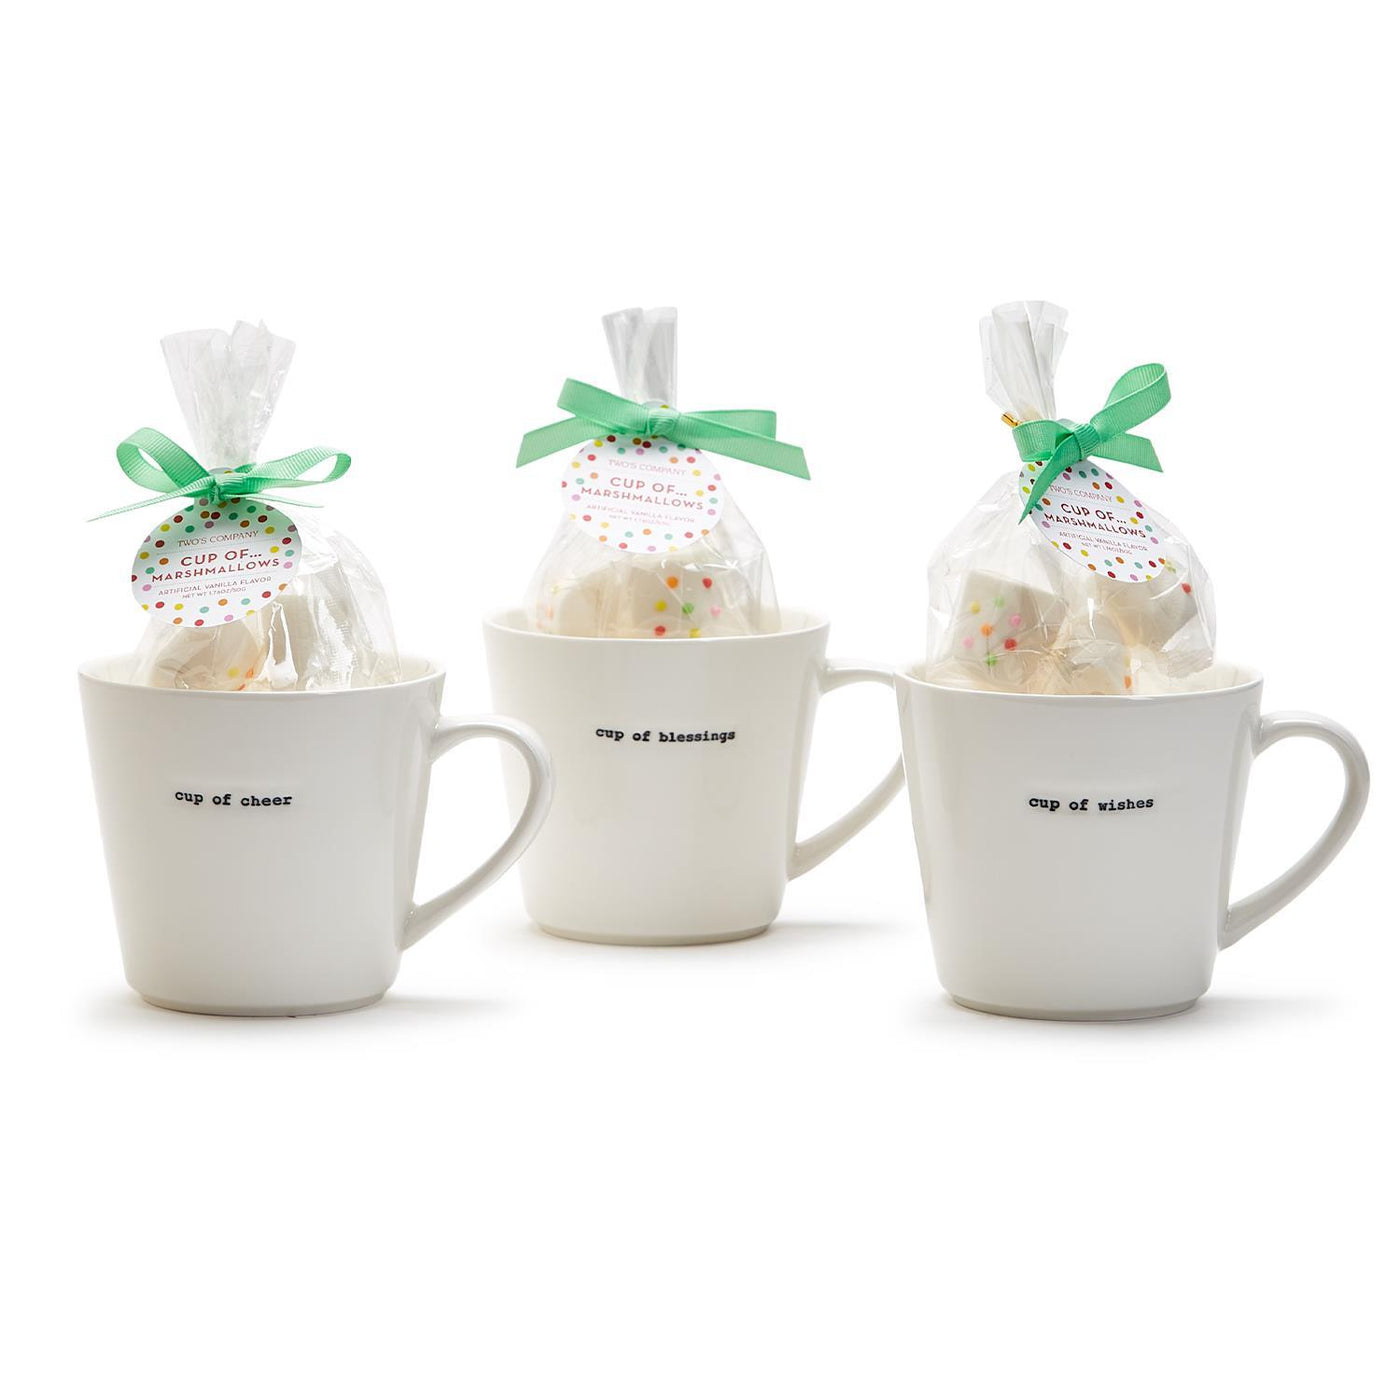 "A Cup Of" Mug with Marshmallows Assorted